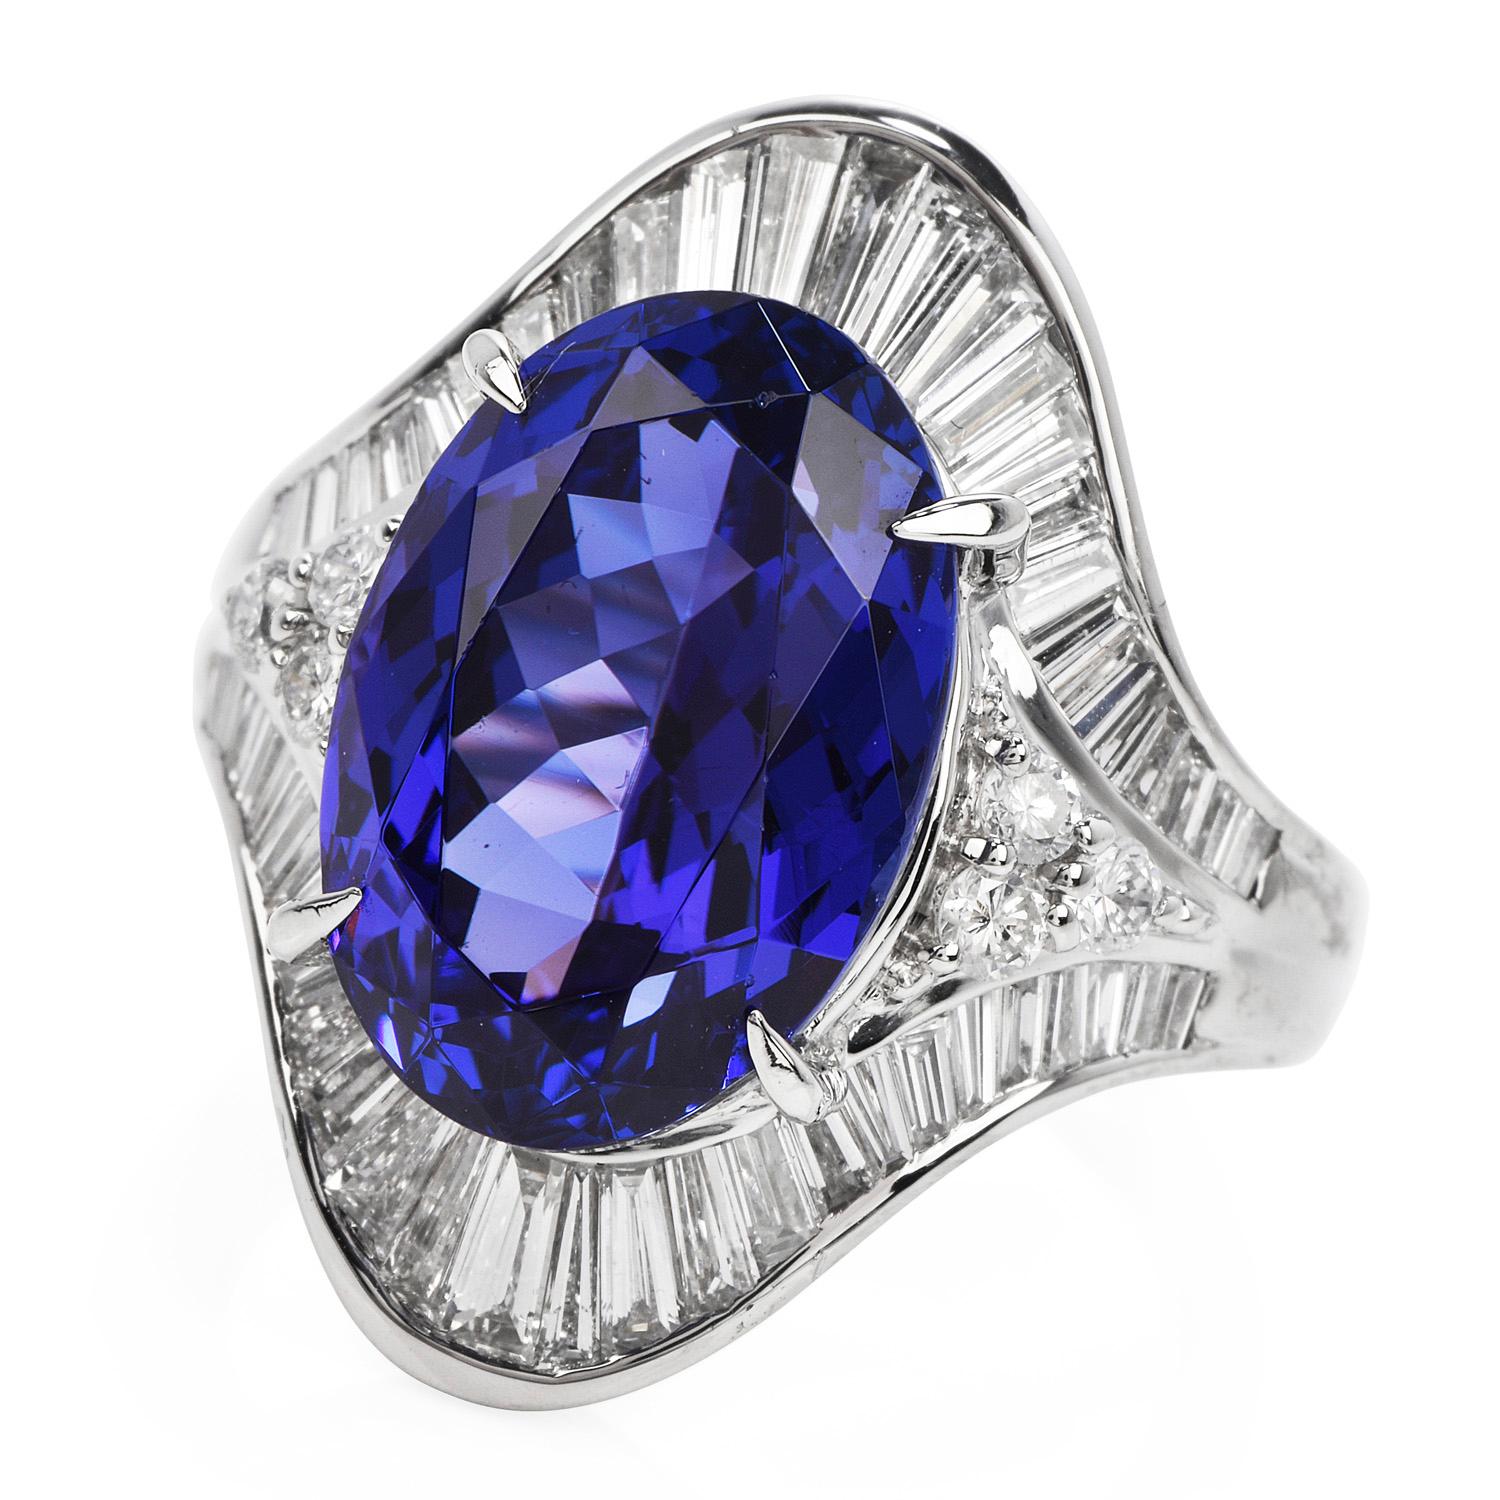 This Vibrant GIA Certified Natural Violet Tanzanite & Diamond Cocktail Ring is sure to make heads turn! 

This tanzanite gem set in solid Platinum and having an approx weight of (8.51) carats, surrounded with (52) Genuine Diamonds baguette-cut,

and